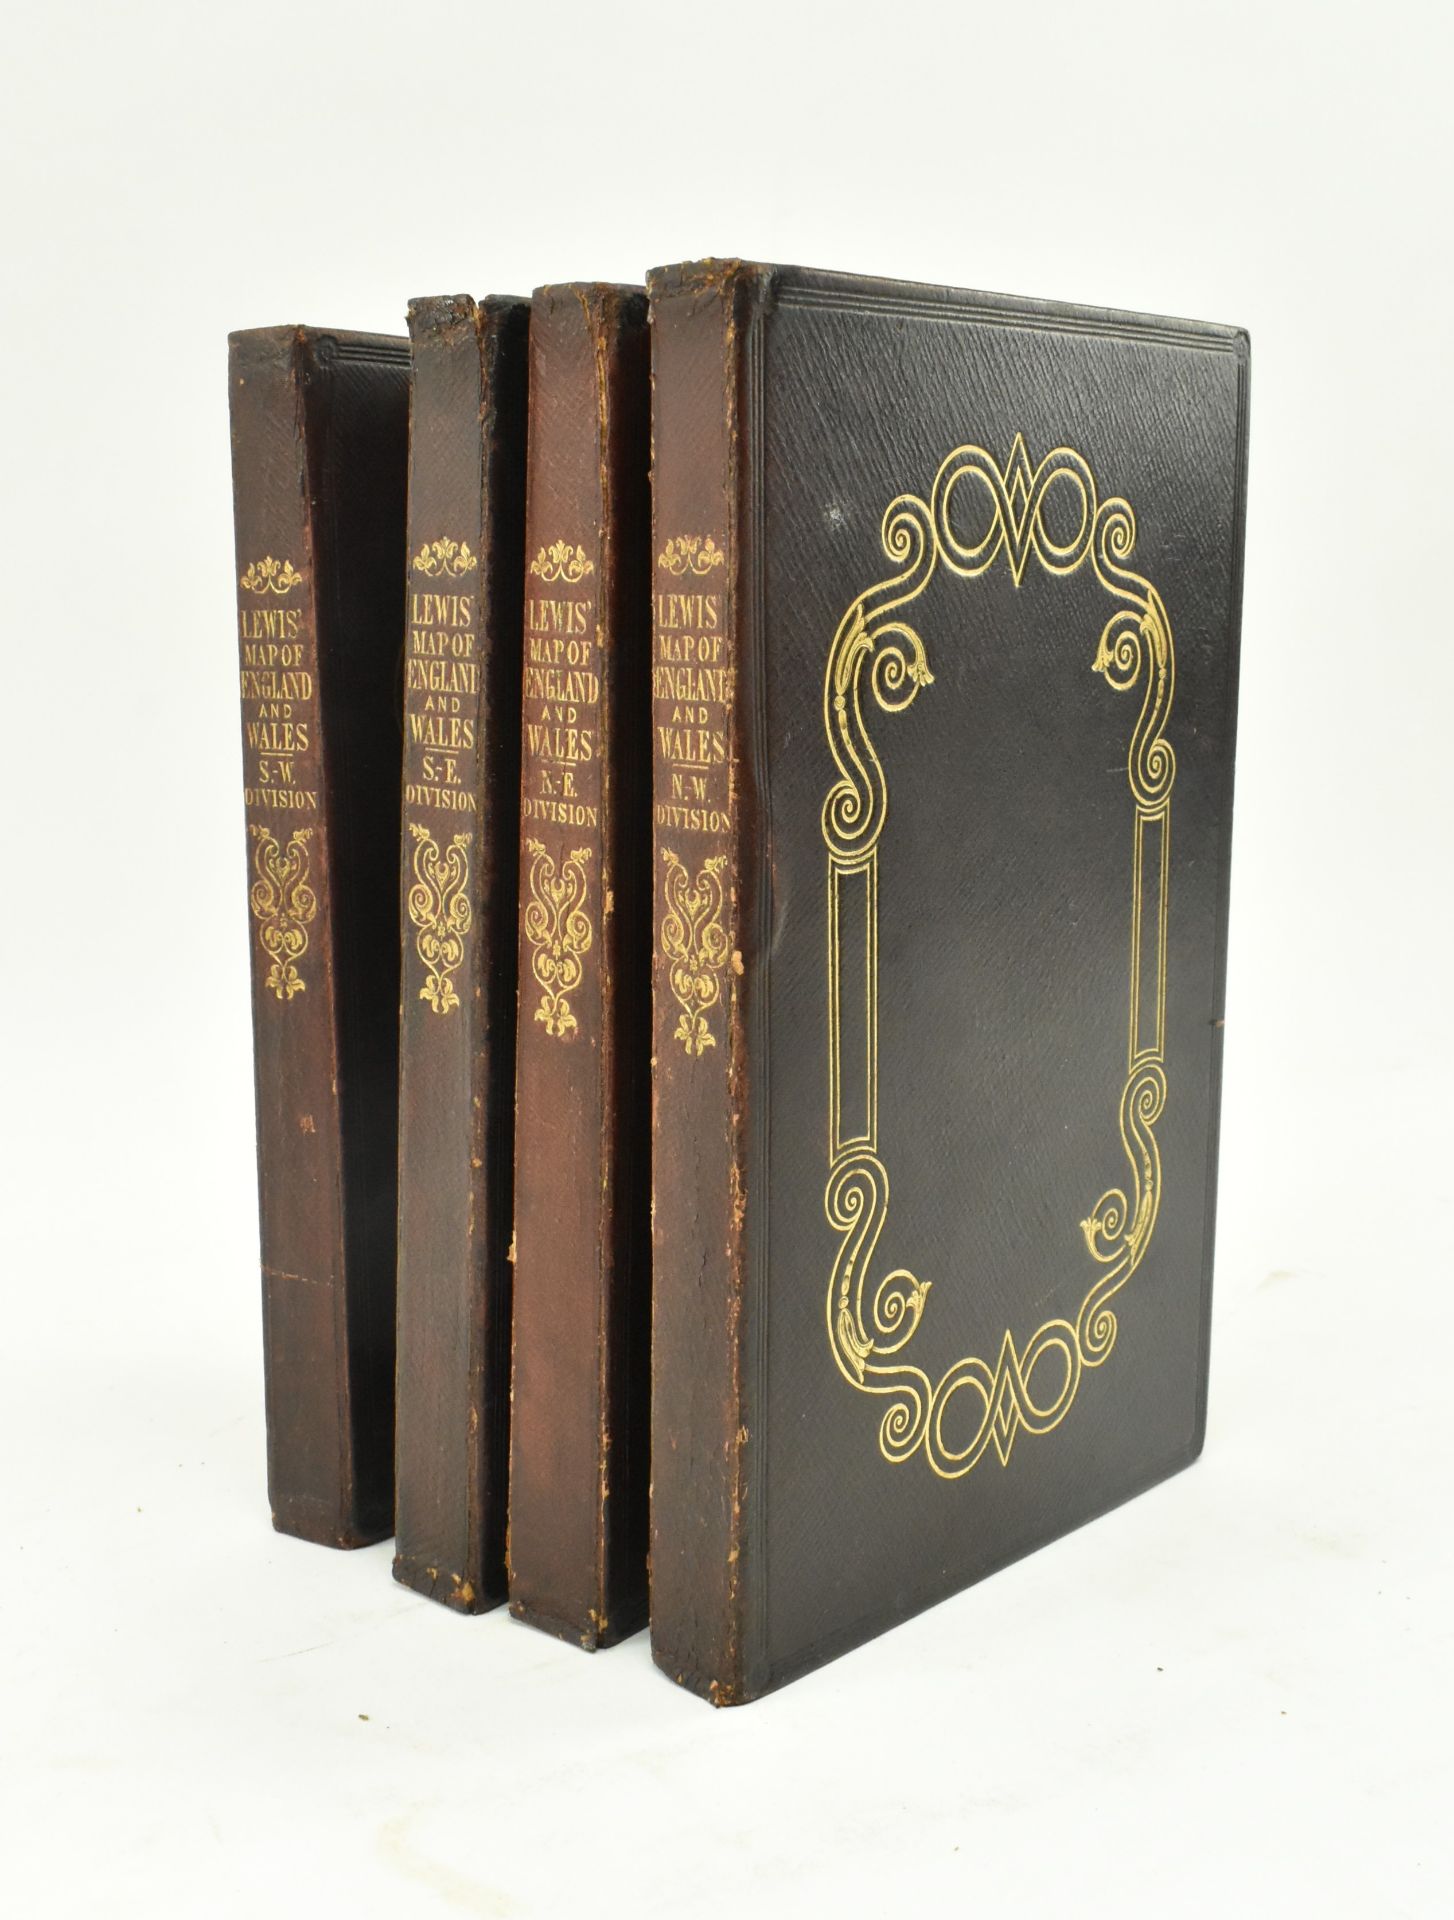 1840 LEWIS' MAP OF ENGLAND AND WALES IN FOUR SMART BINDINGS - Image 7 of 7